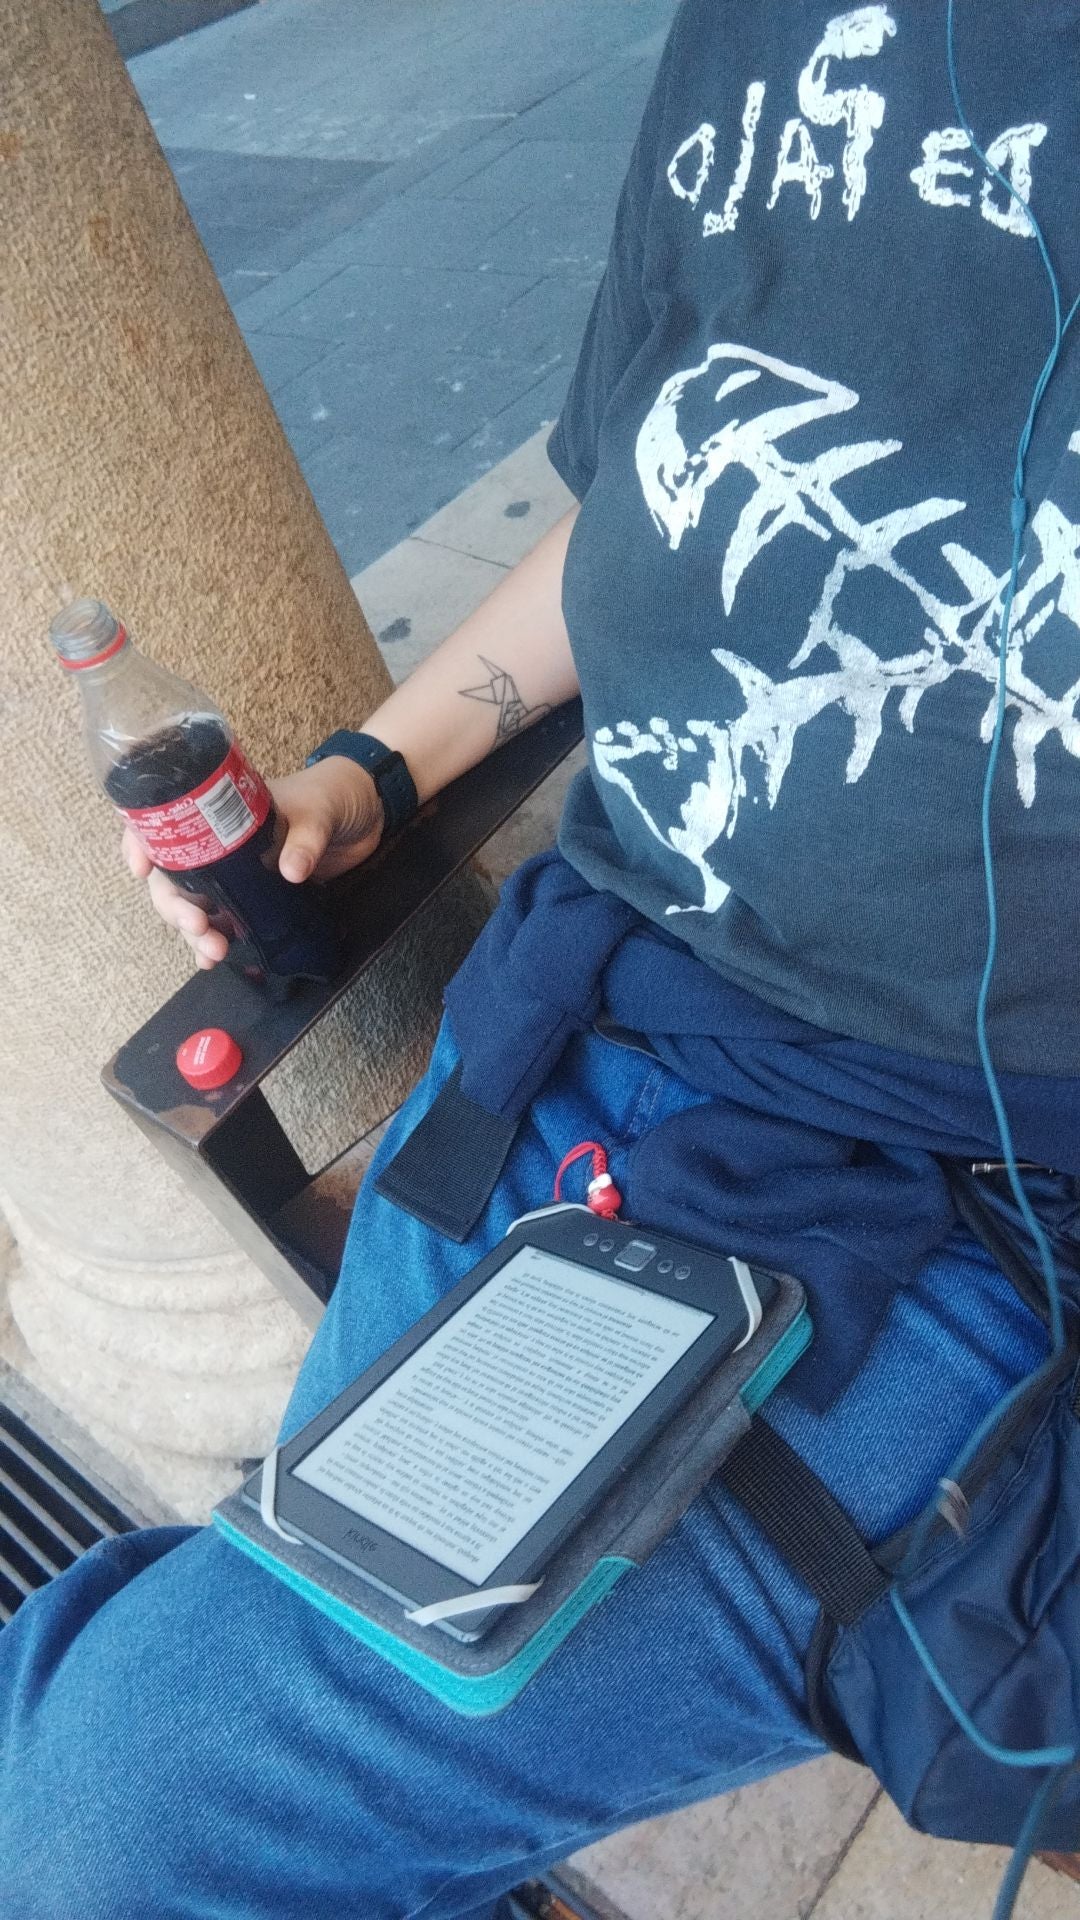 Bbwpictures -  POV: You see a female reading in the street, with no bra and some Jehovah's Witnesses preaching at the side. You approach and discover that her nipple piercings are noticeable through her t-shirt and that she's reading a book written by the Marquis de Sade. (F)